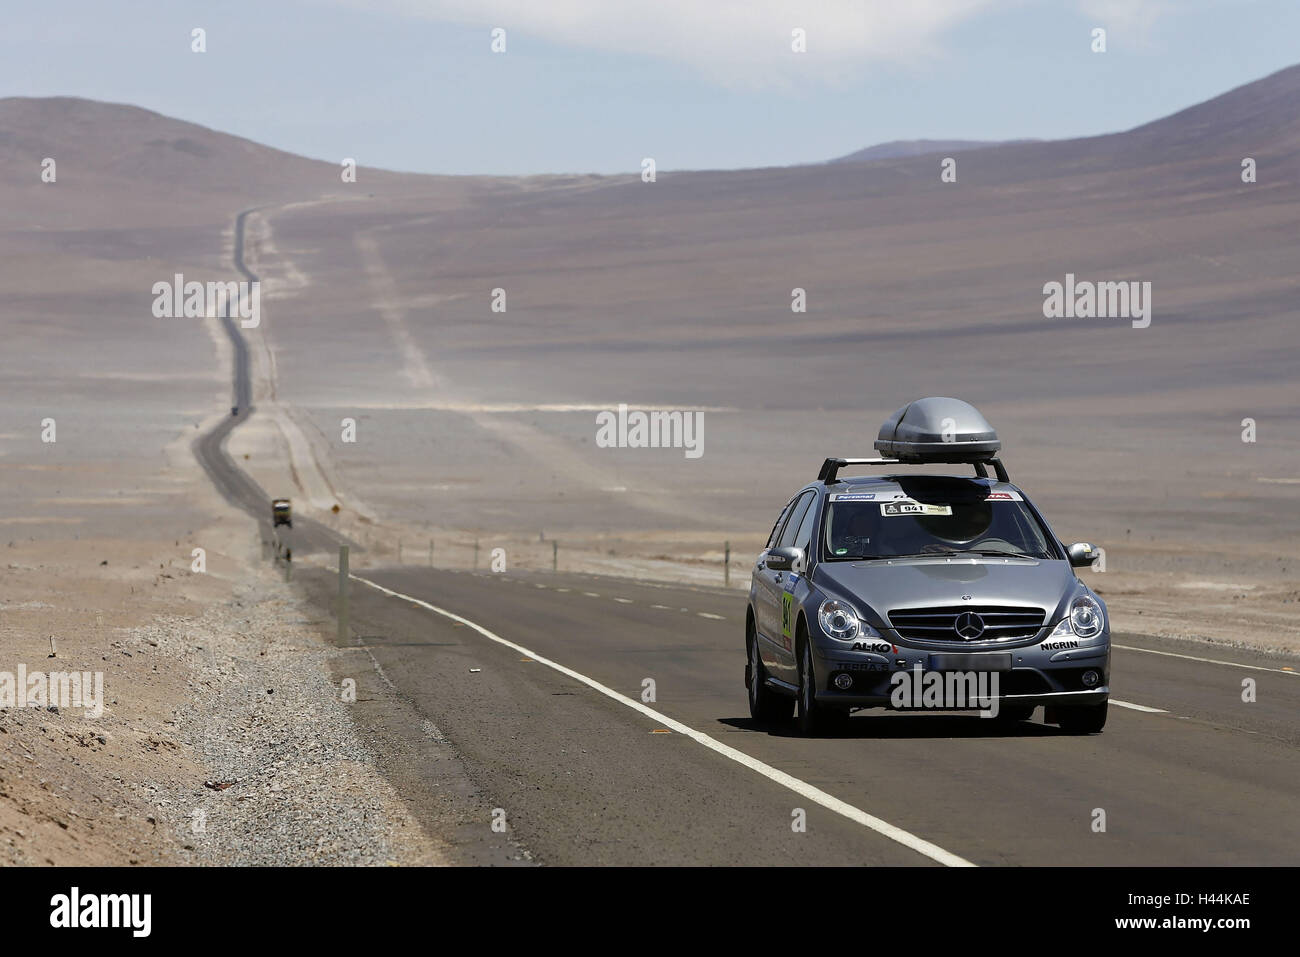 Rally Dakar 2010, the Andes, Mercedes R class, Escort vehicle, 5th stage, Stock Photo